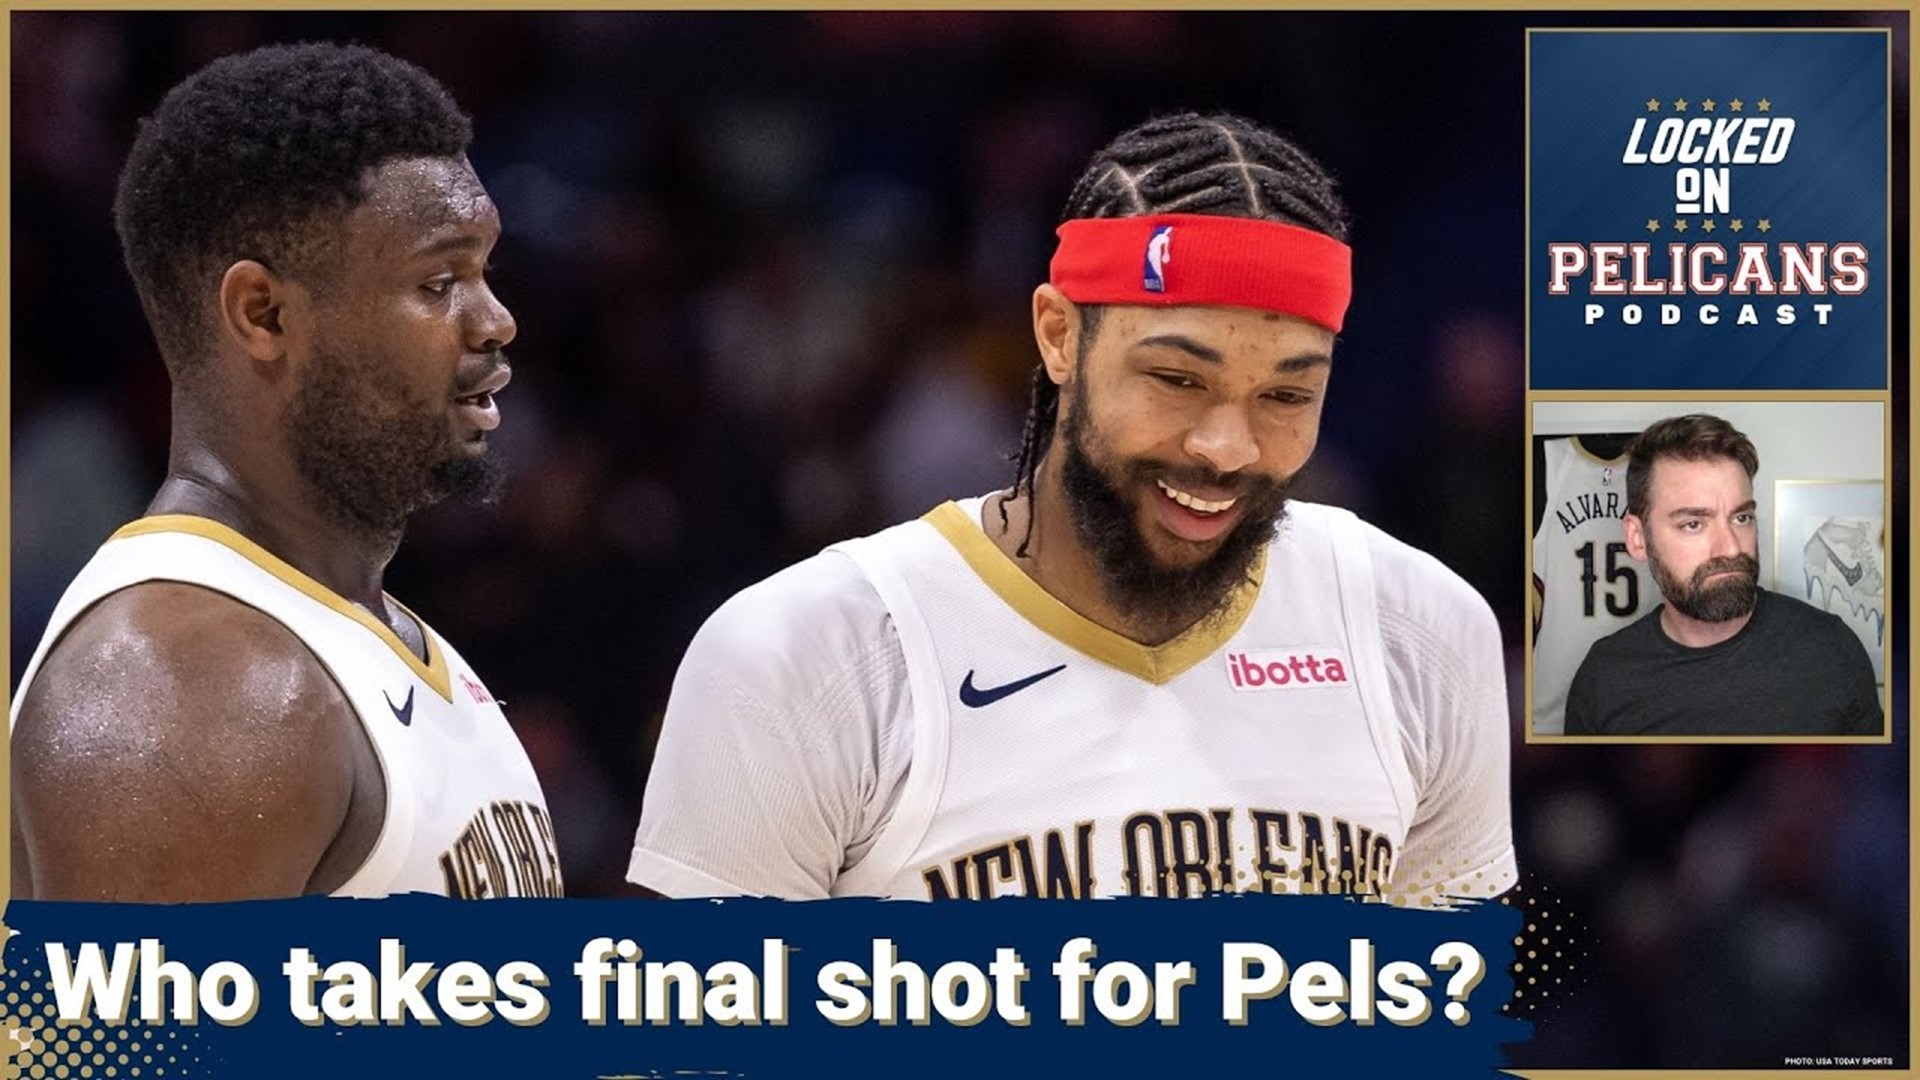 In a playoff series who do you want to take the final shot in the clutch for the New Orleans Pelicans: Zion Williamson or Brandon Ingram?